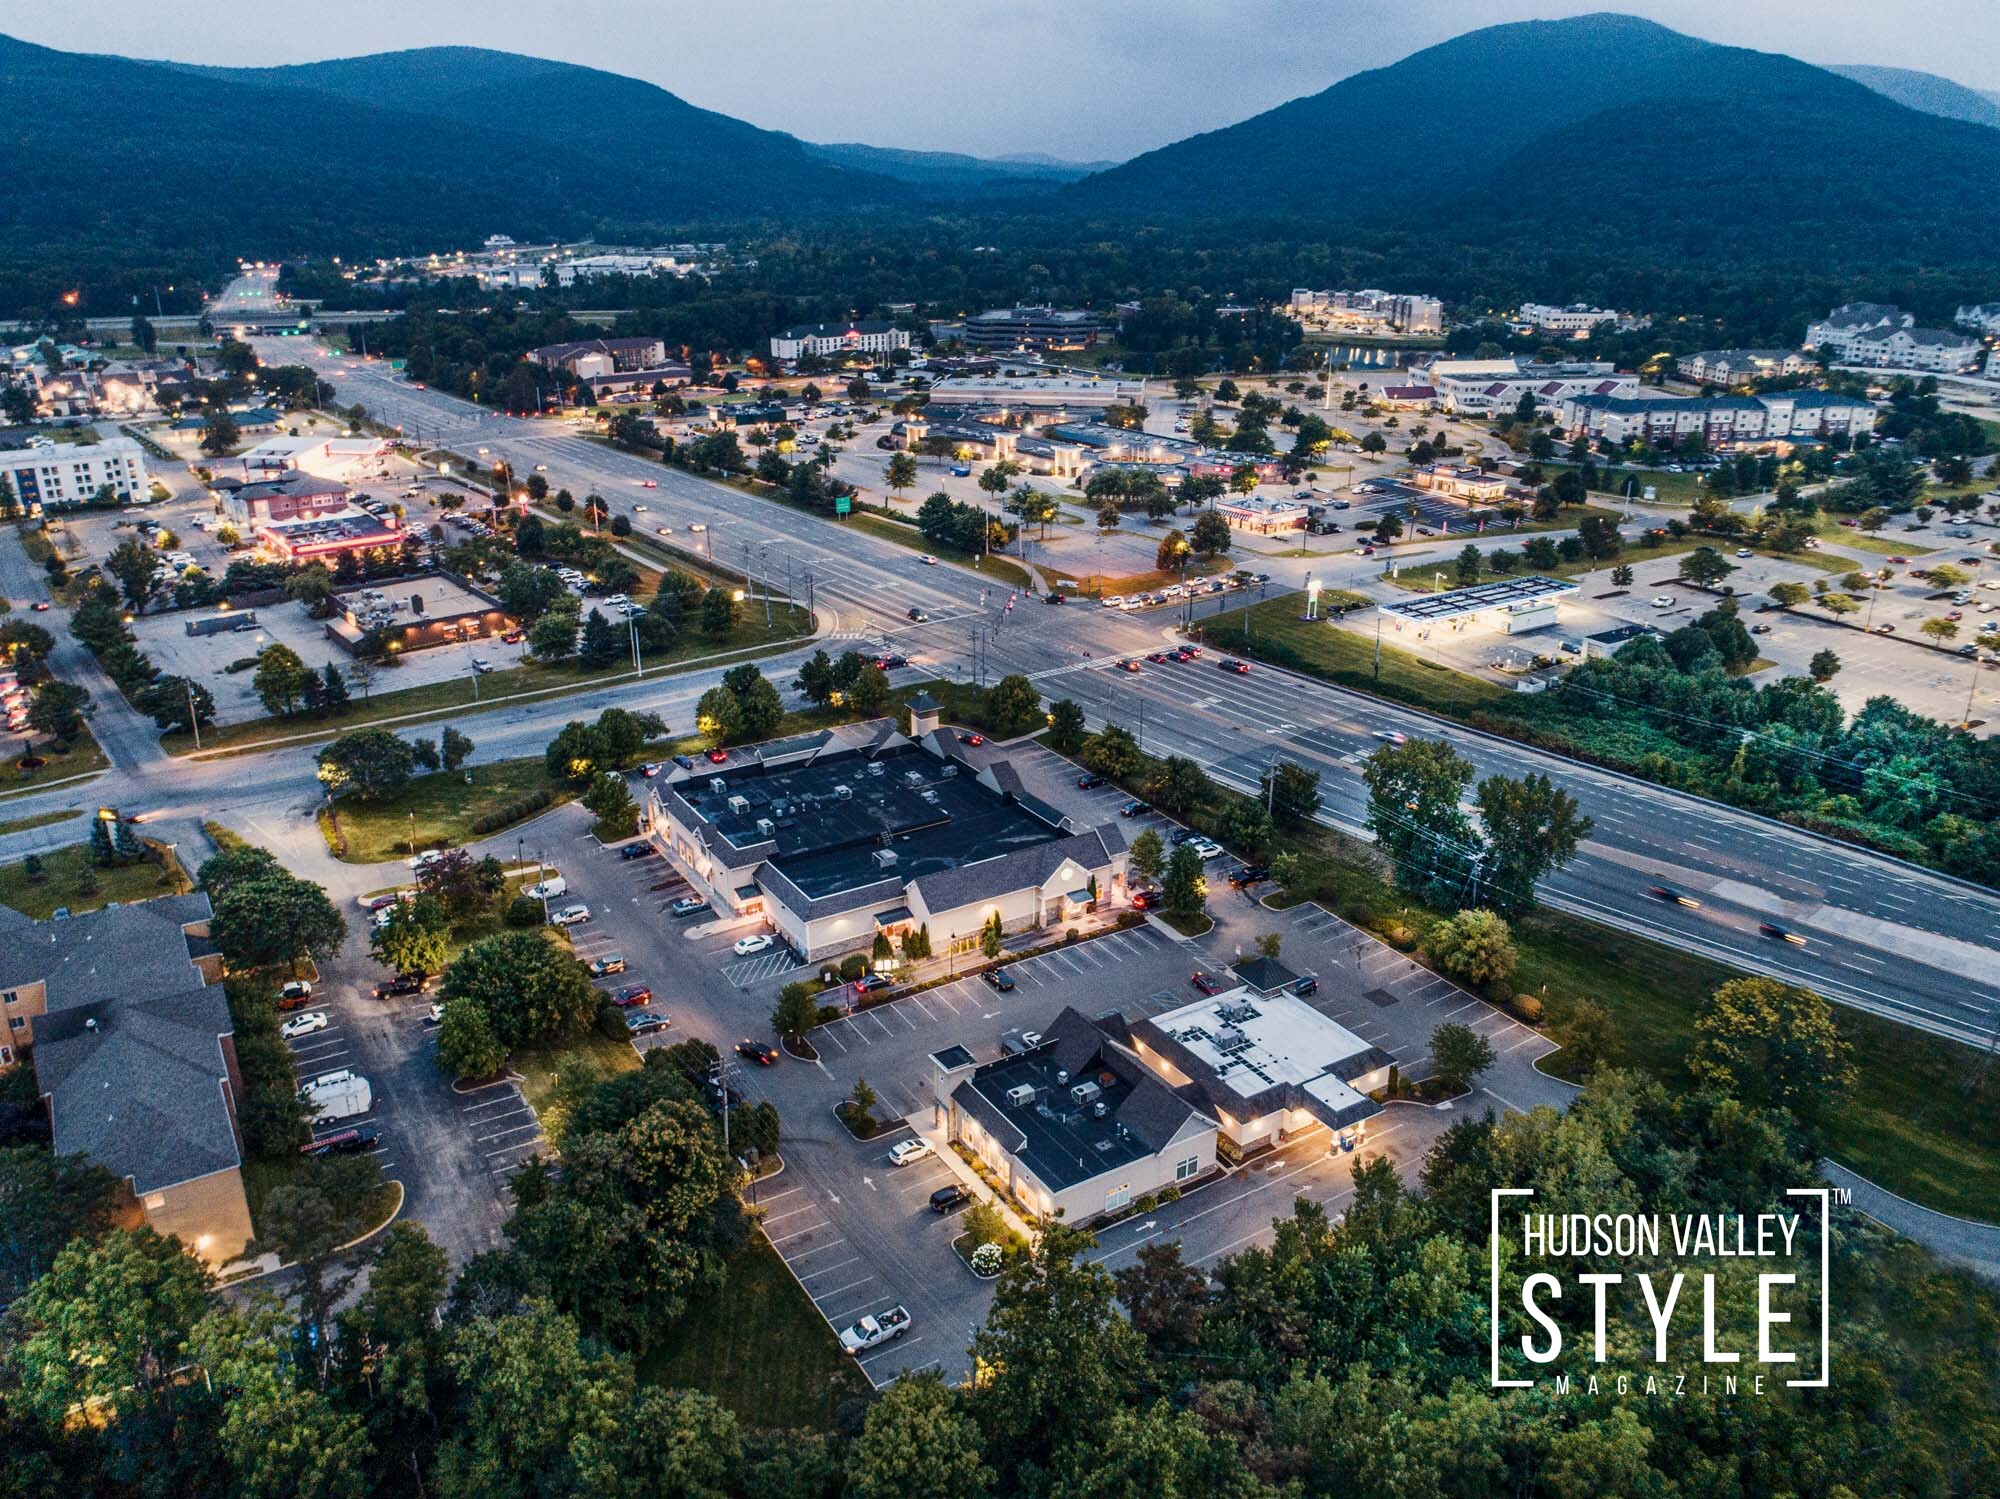 Commercial Real Estate Photography Project in Fishkill, NY - Twilight Photography - Aerial Drone Photography - HDR Photography - Duncan Avenue Studios, New York - Hudson Valley